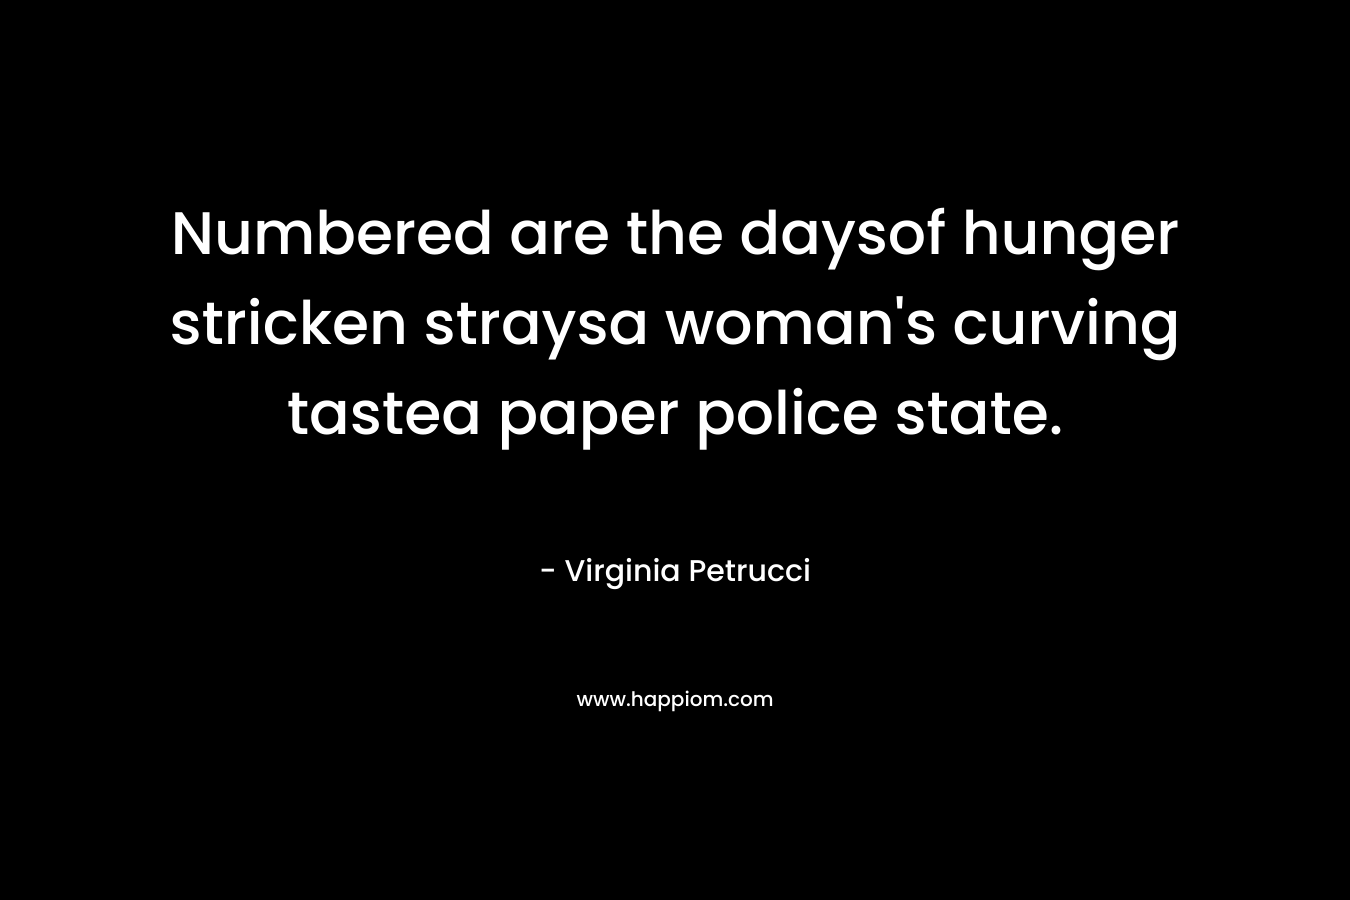 Numbered are the daysof hunger stricken straysa woman’s curving tastea paper police state. – Virginia Petrucci